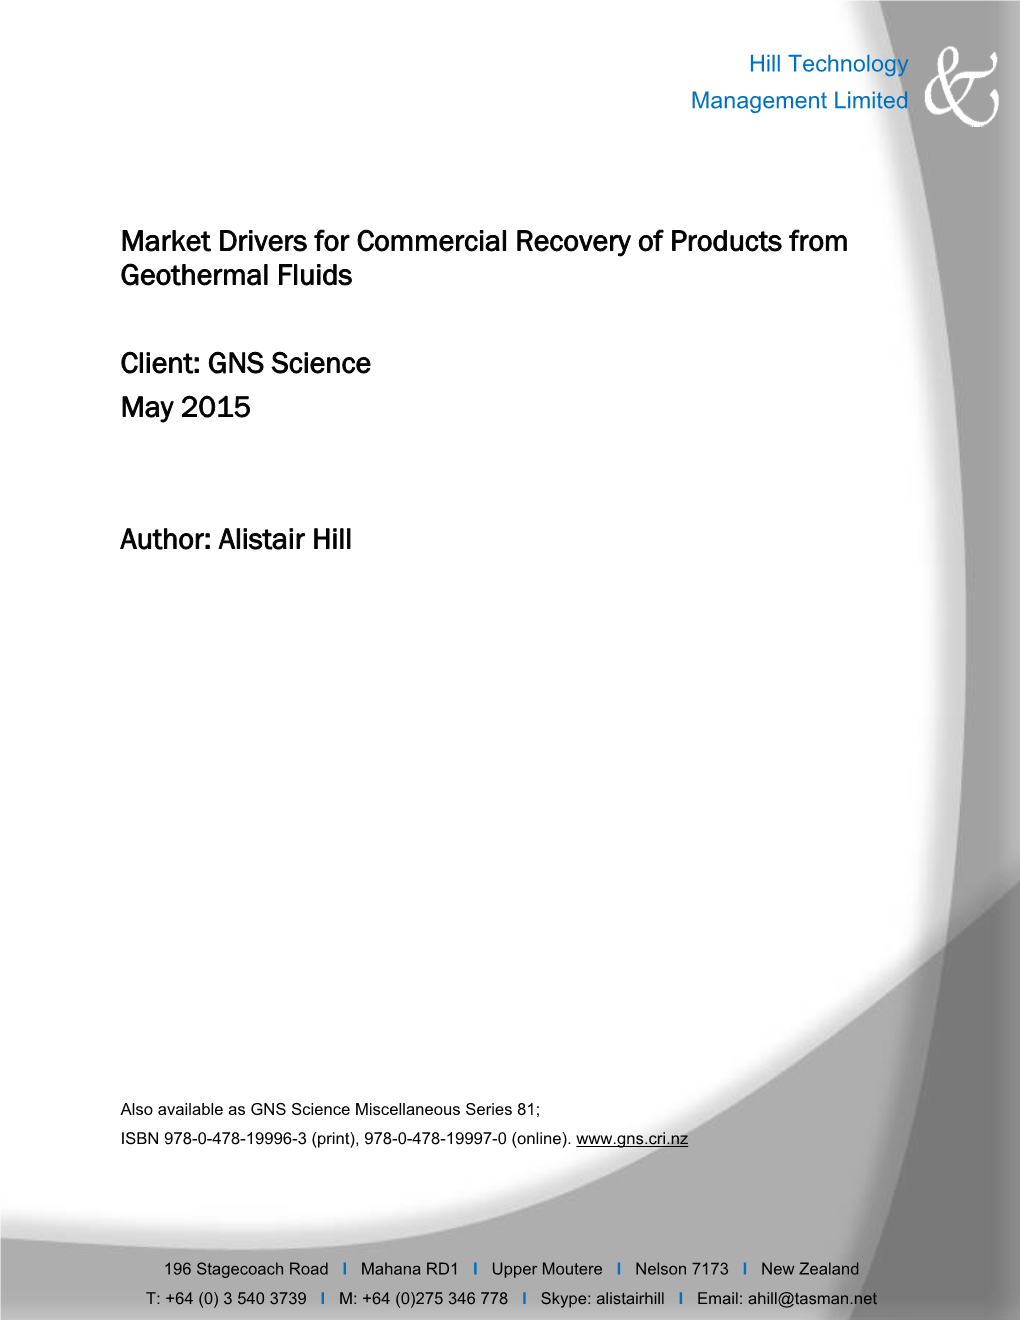 Market Drivers for Commercial Recovery of Products from Geothermal Fluids